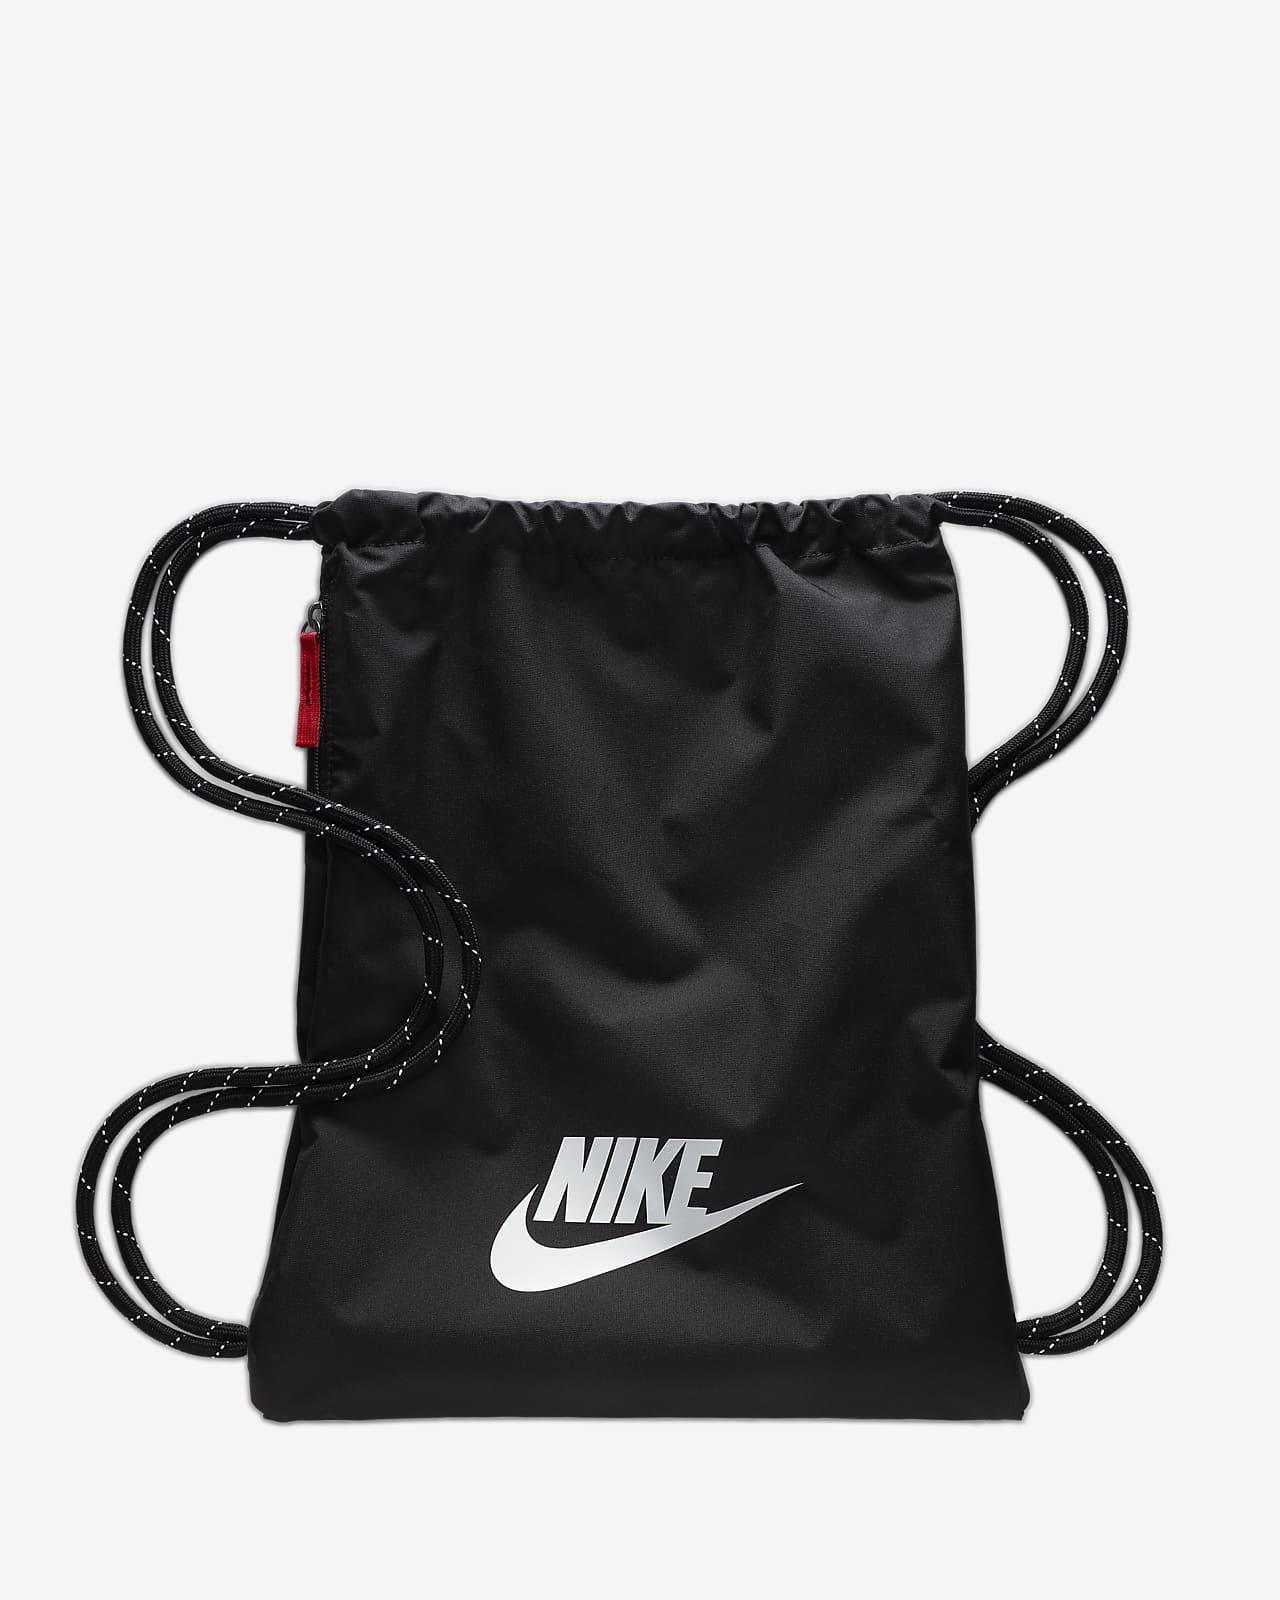 nike bags for gym